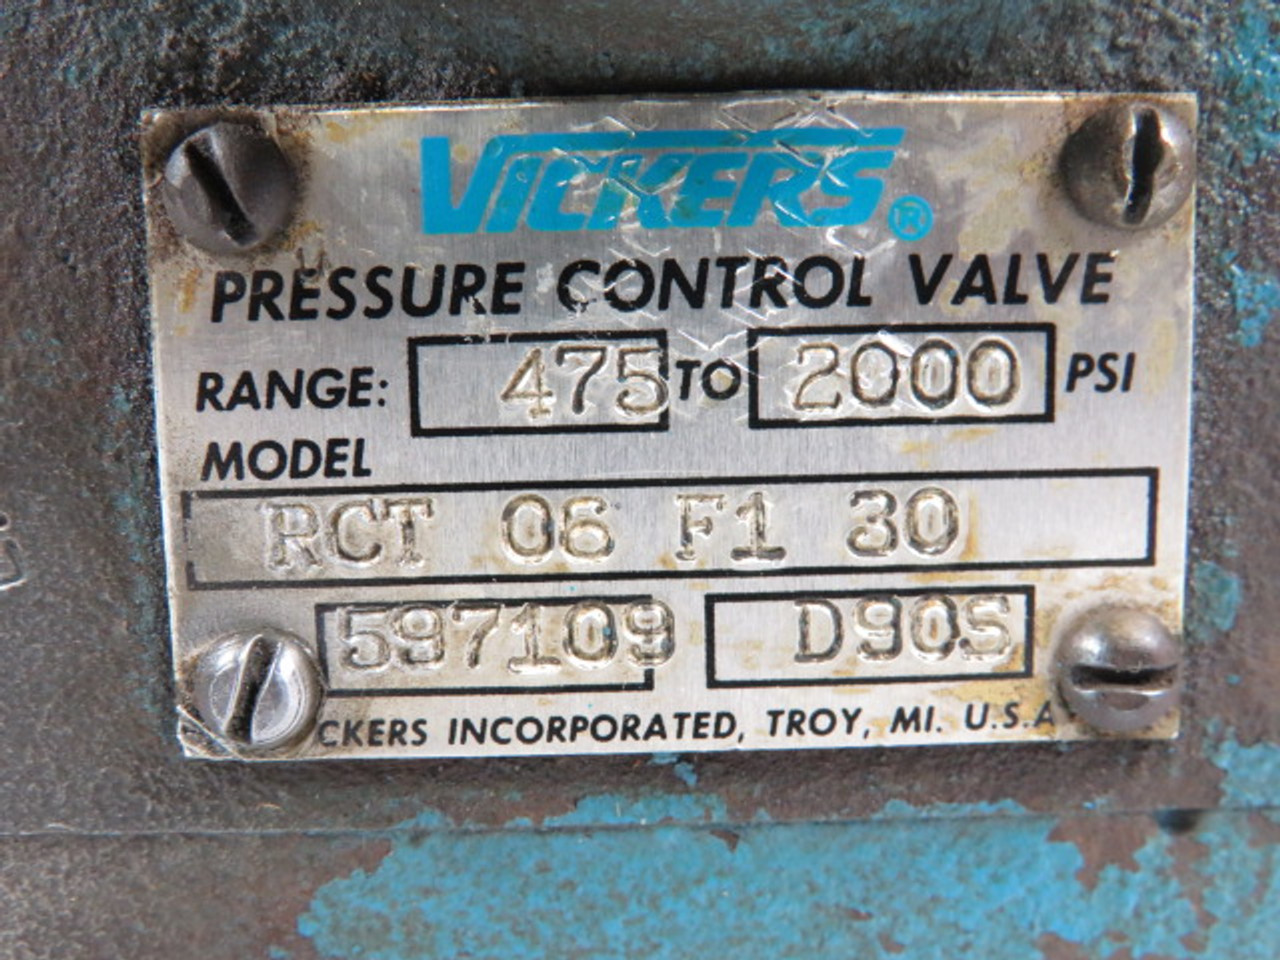 Vickers RCT-06-F1-30 Hydraulic Hydro-Cushion Relief Valve 475-2000PSI USED